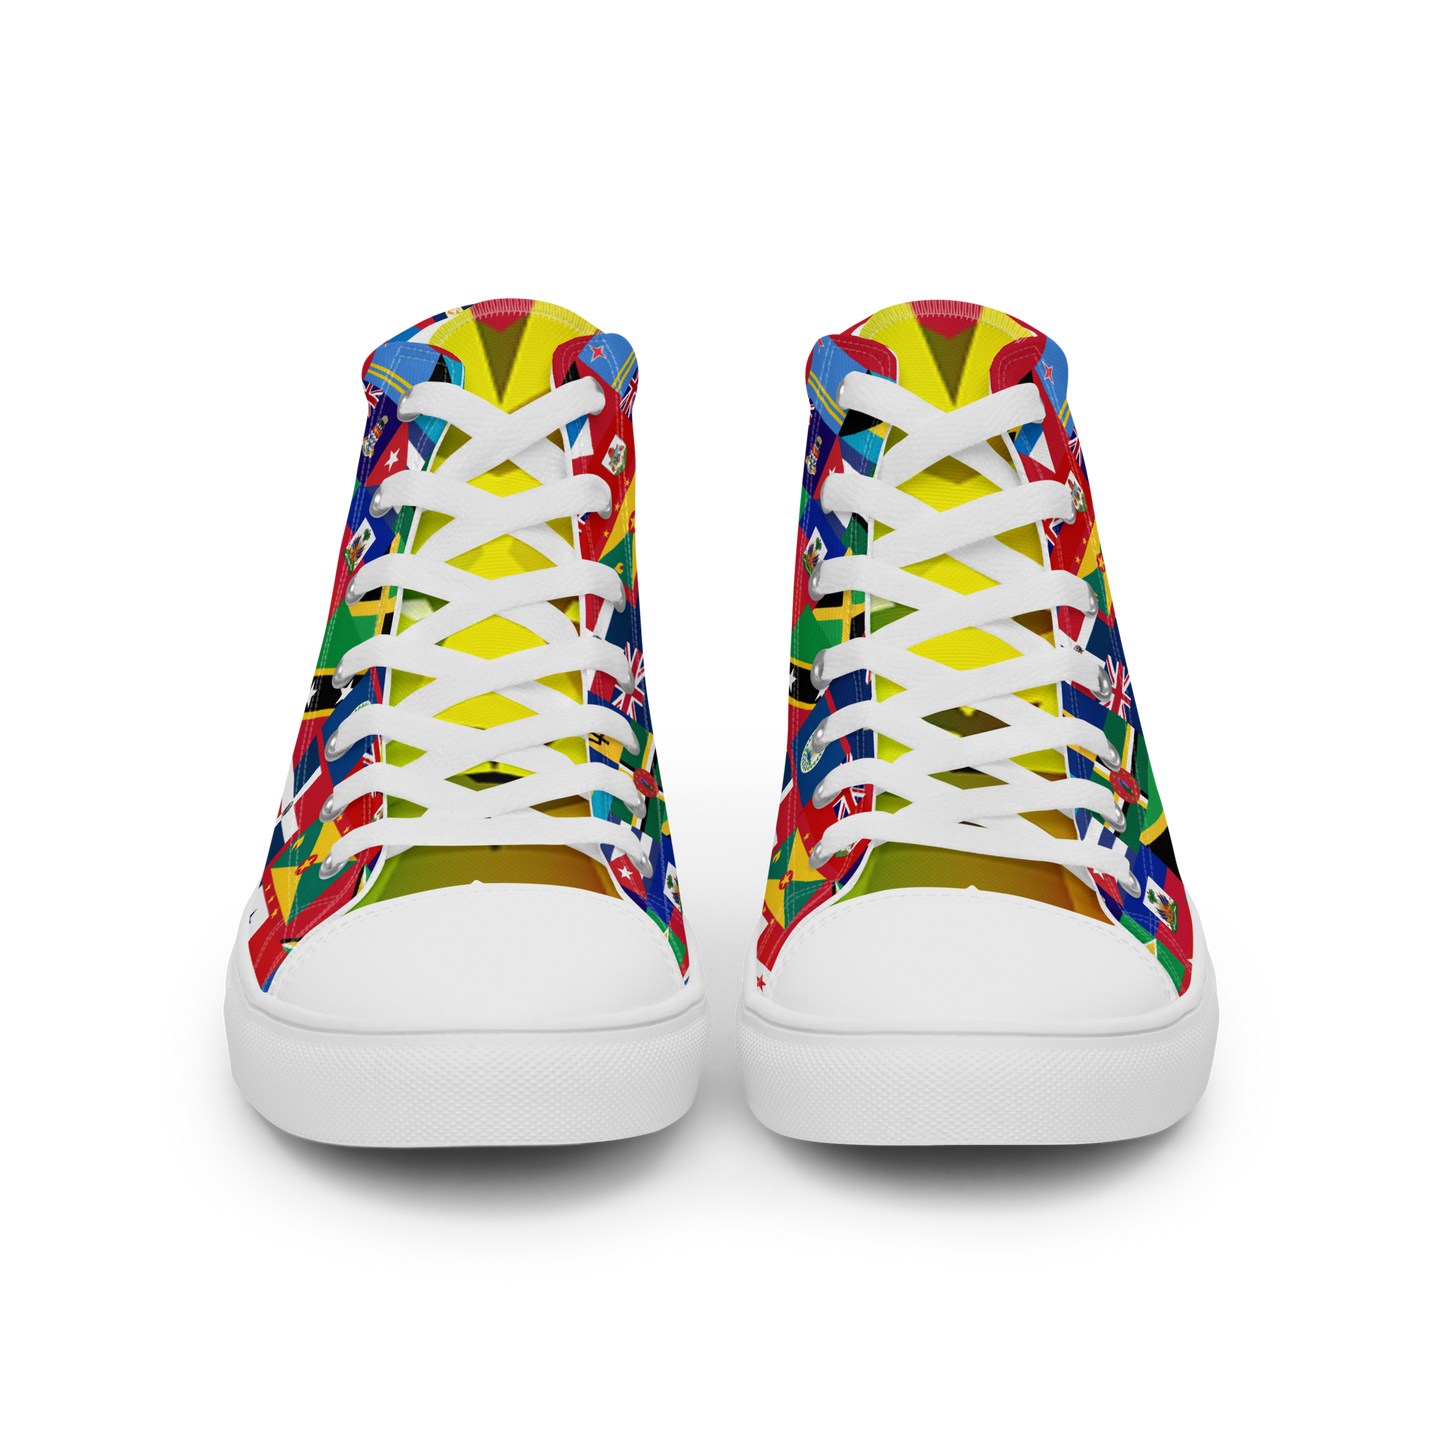 West Indian Flag Women’s high top canvas shoes